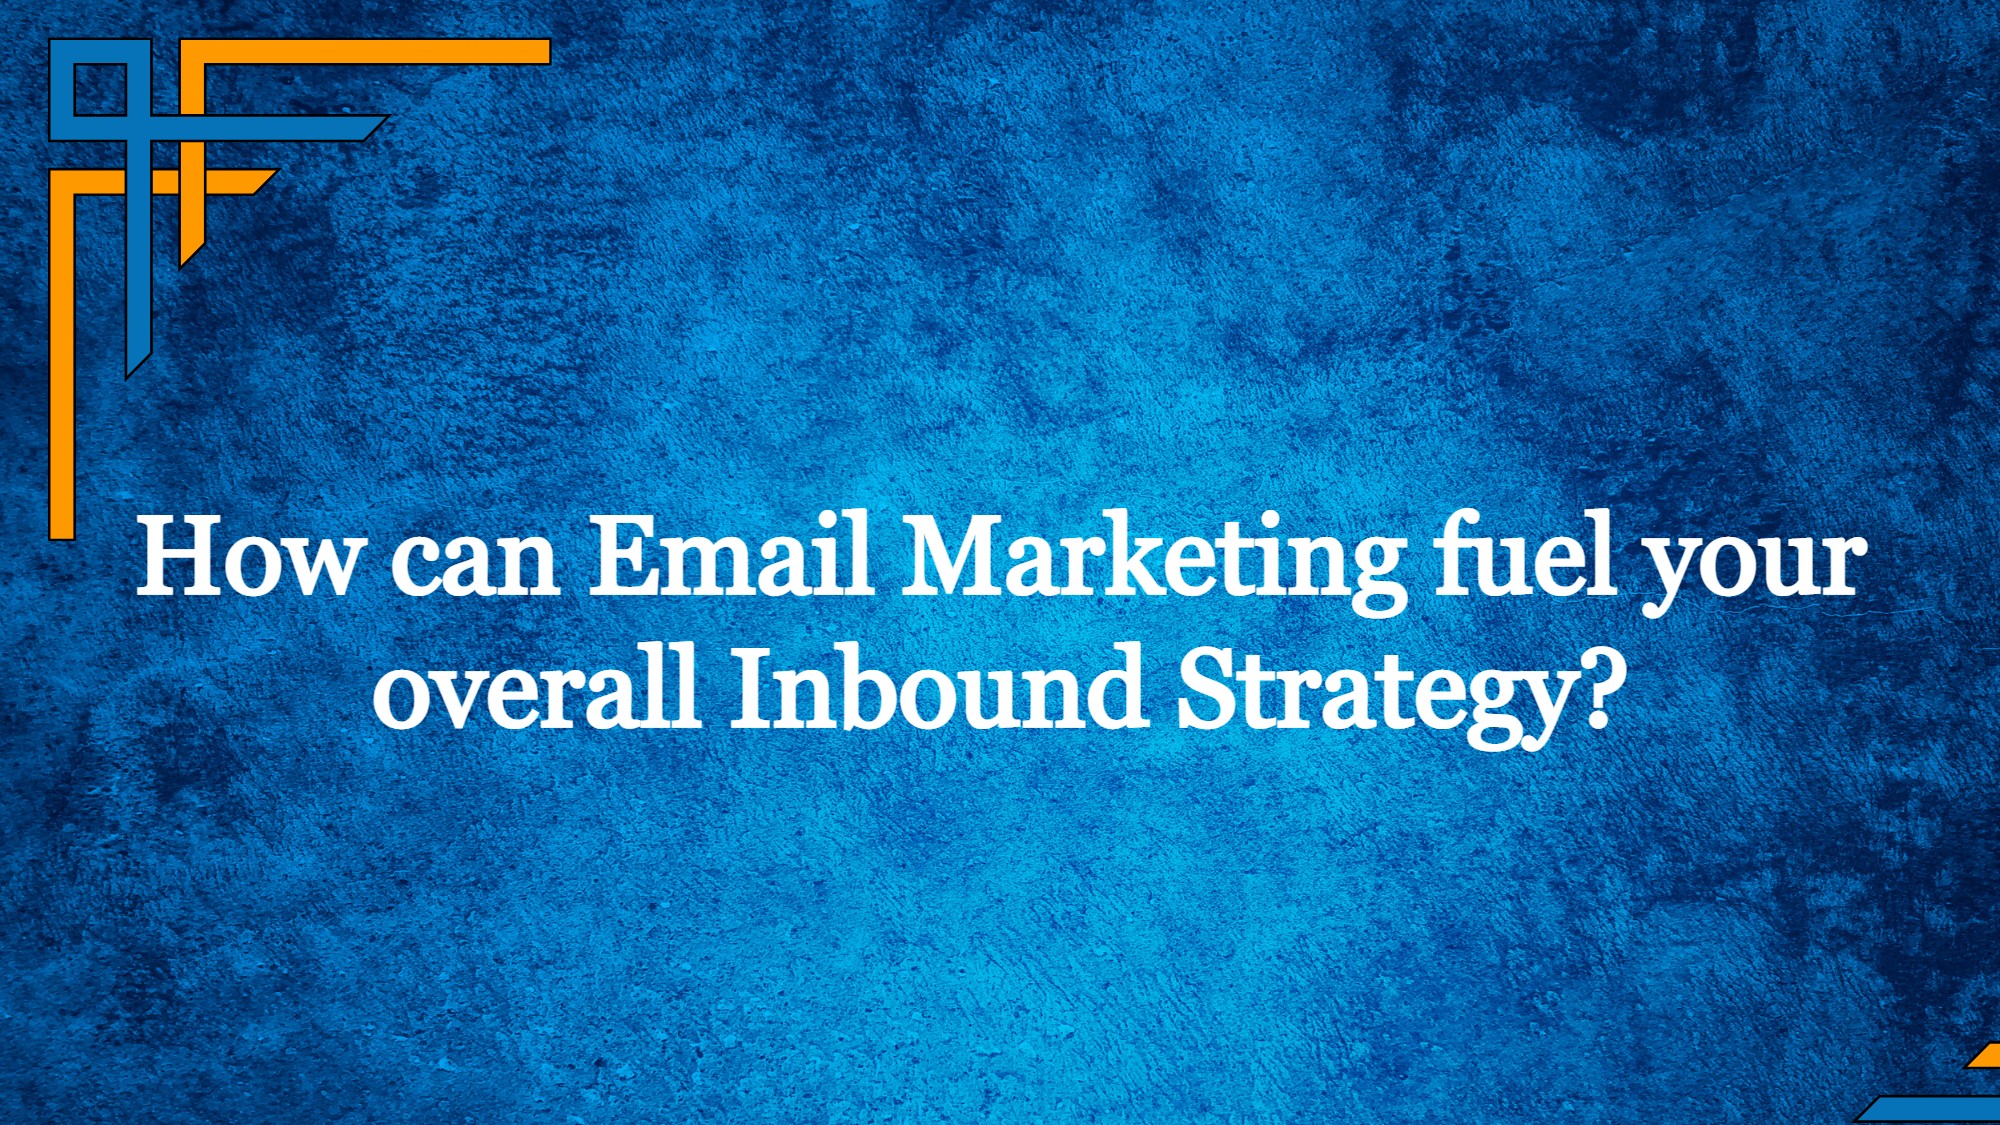 How can email marketing fuel your overall inbound strategy?